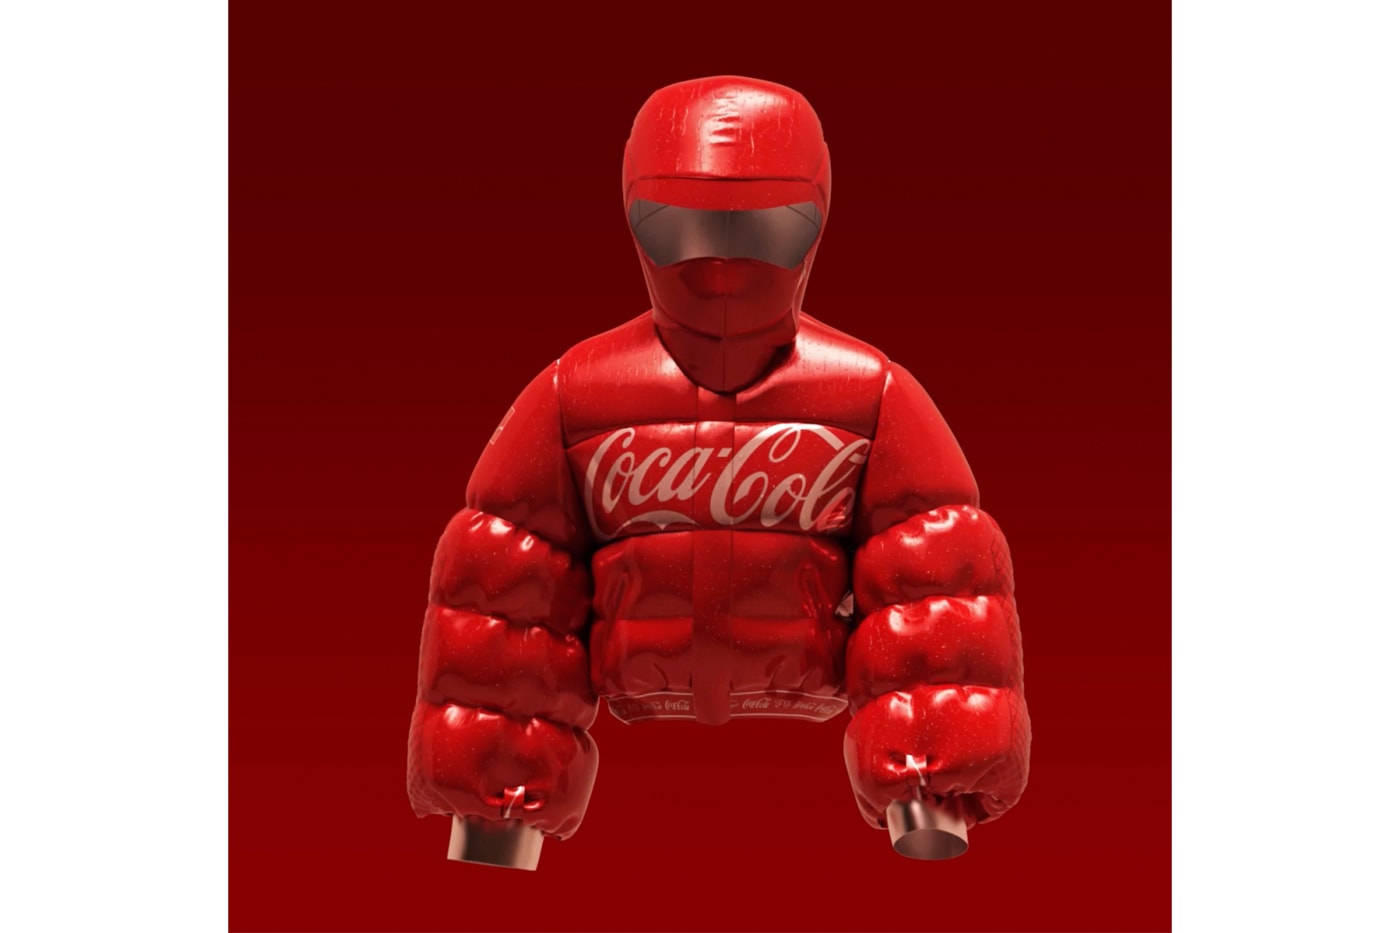 Coca-Cola Auction First NFT Collectibles loot box international friendship day digital metaverse special olympics 1 of 1  Bubble Jacket Wearable Friendship Card Sound Visualizer Vintage Cooler news